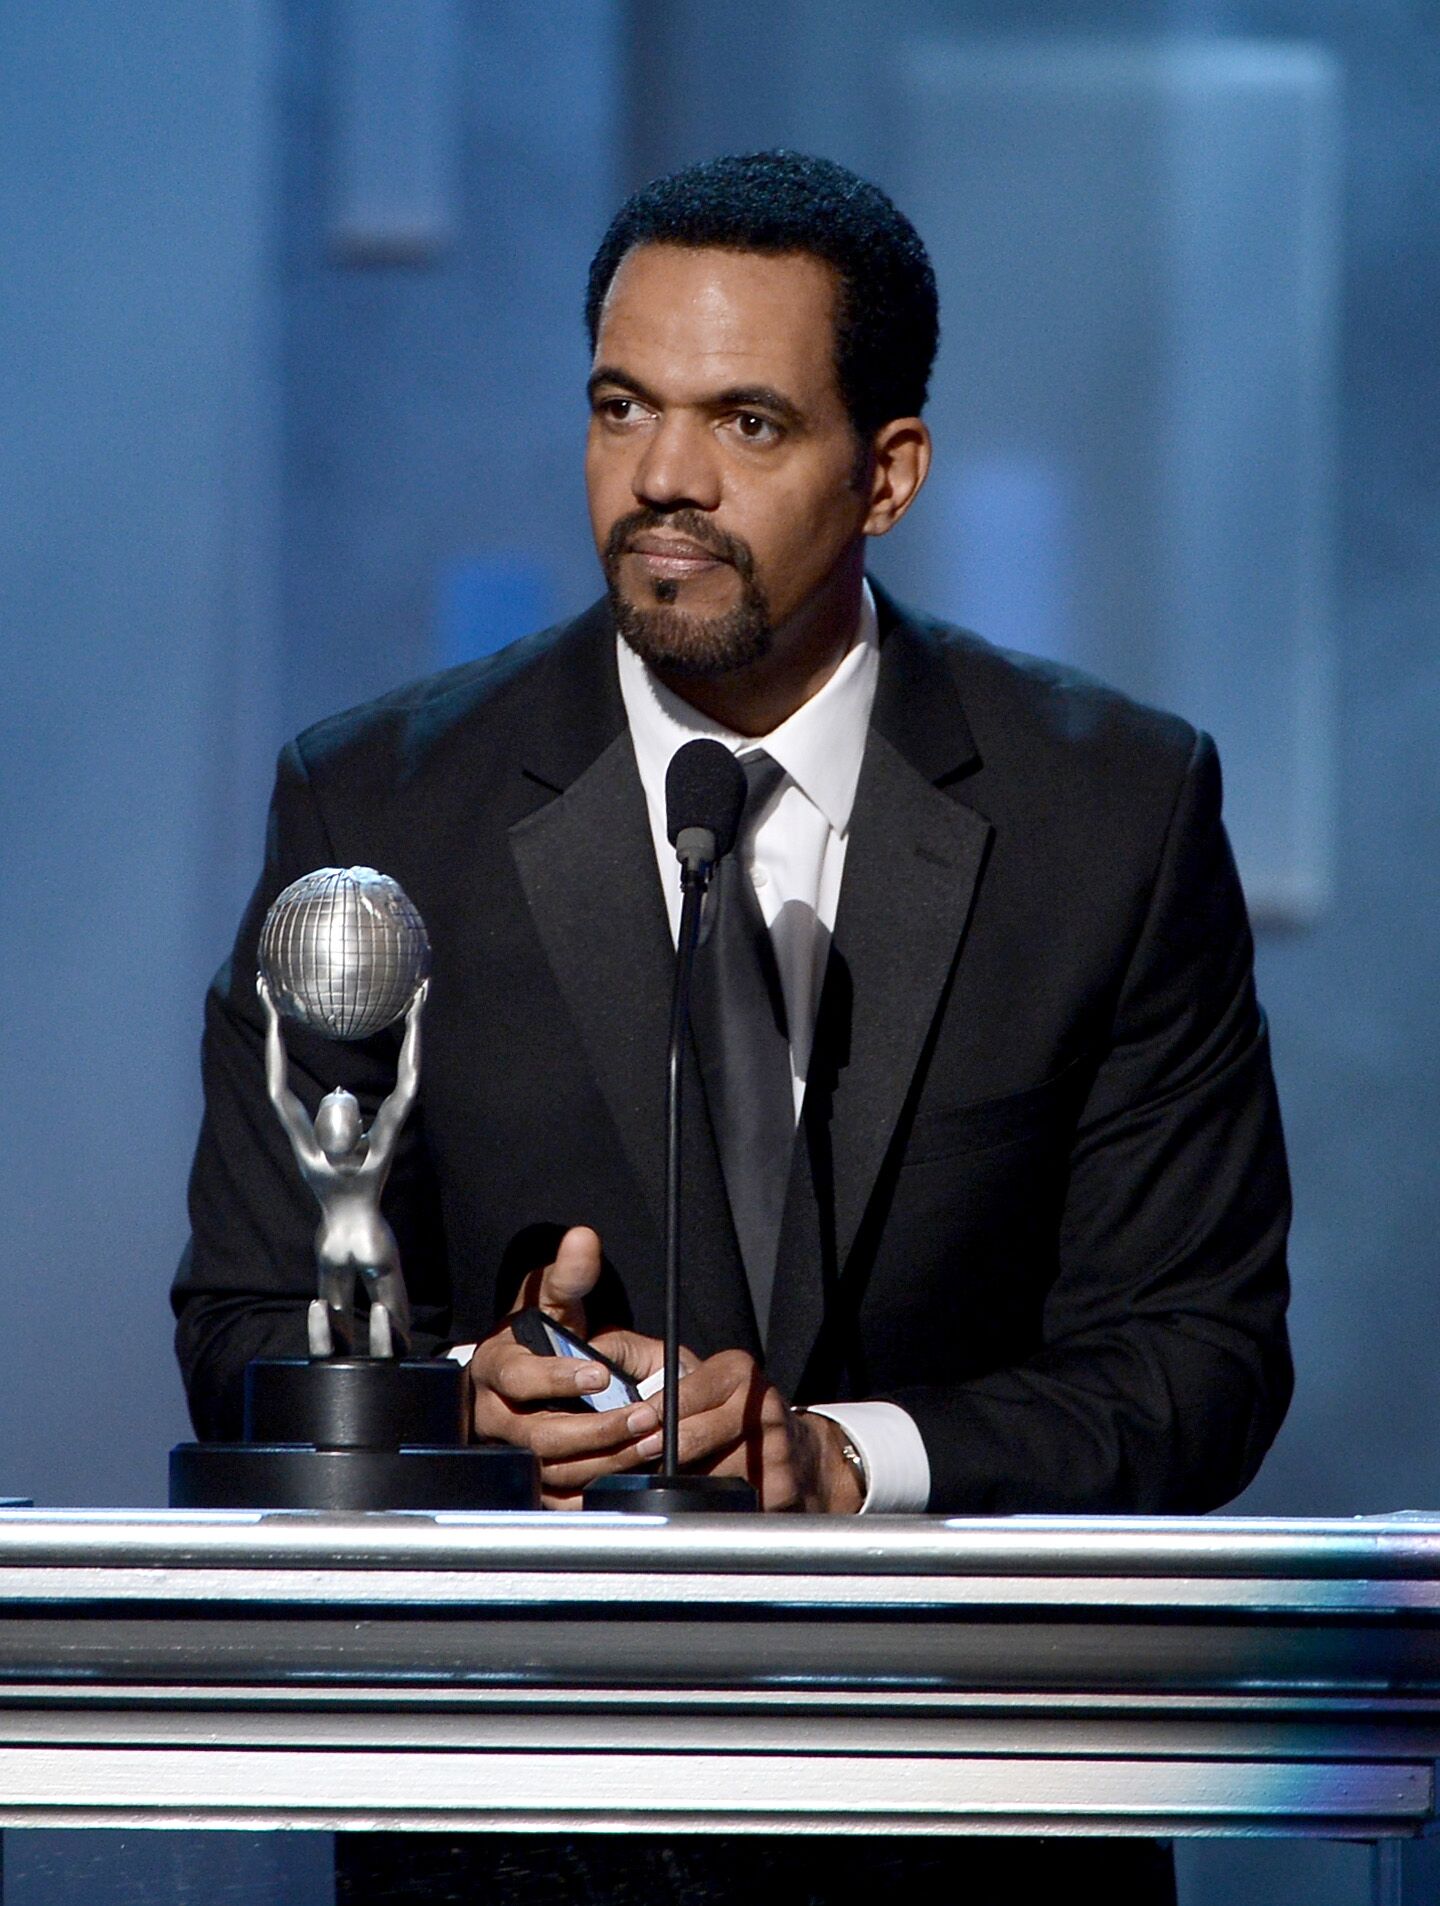 Kristoff St. John onstage during the 44th NAACP Image Awards at The Shrine Auditorium | Getty Images